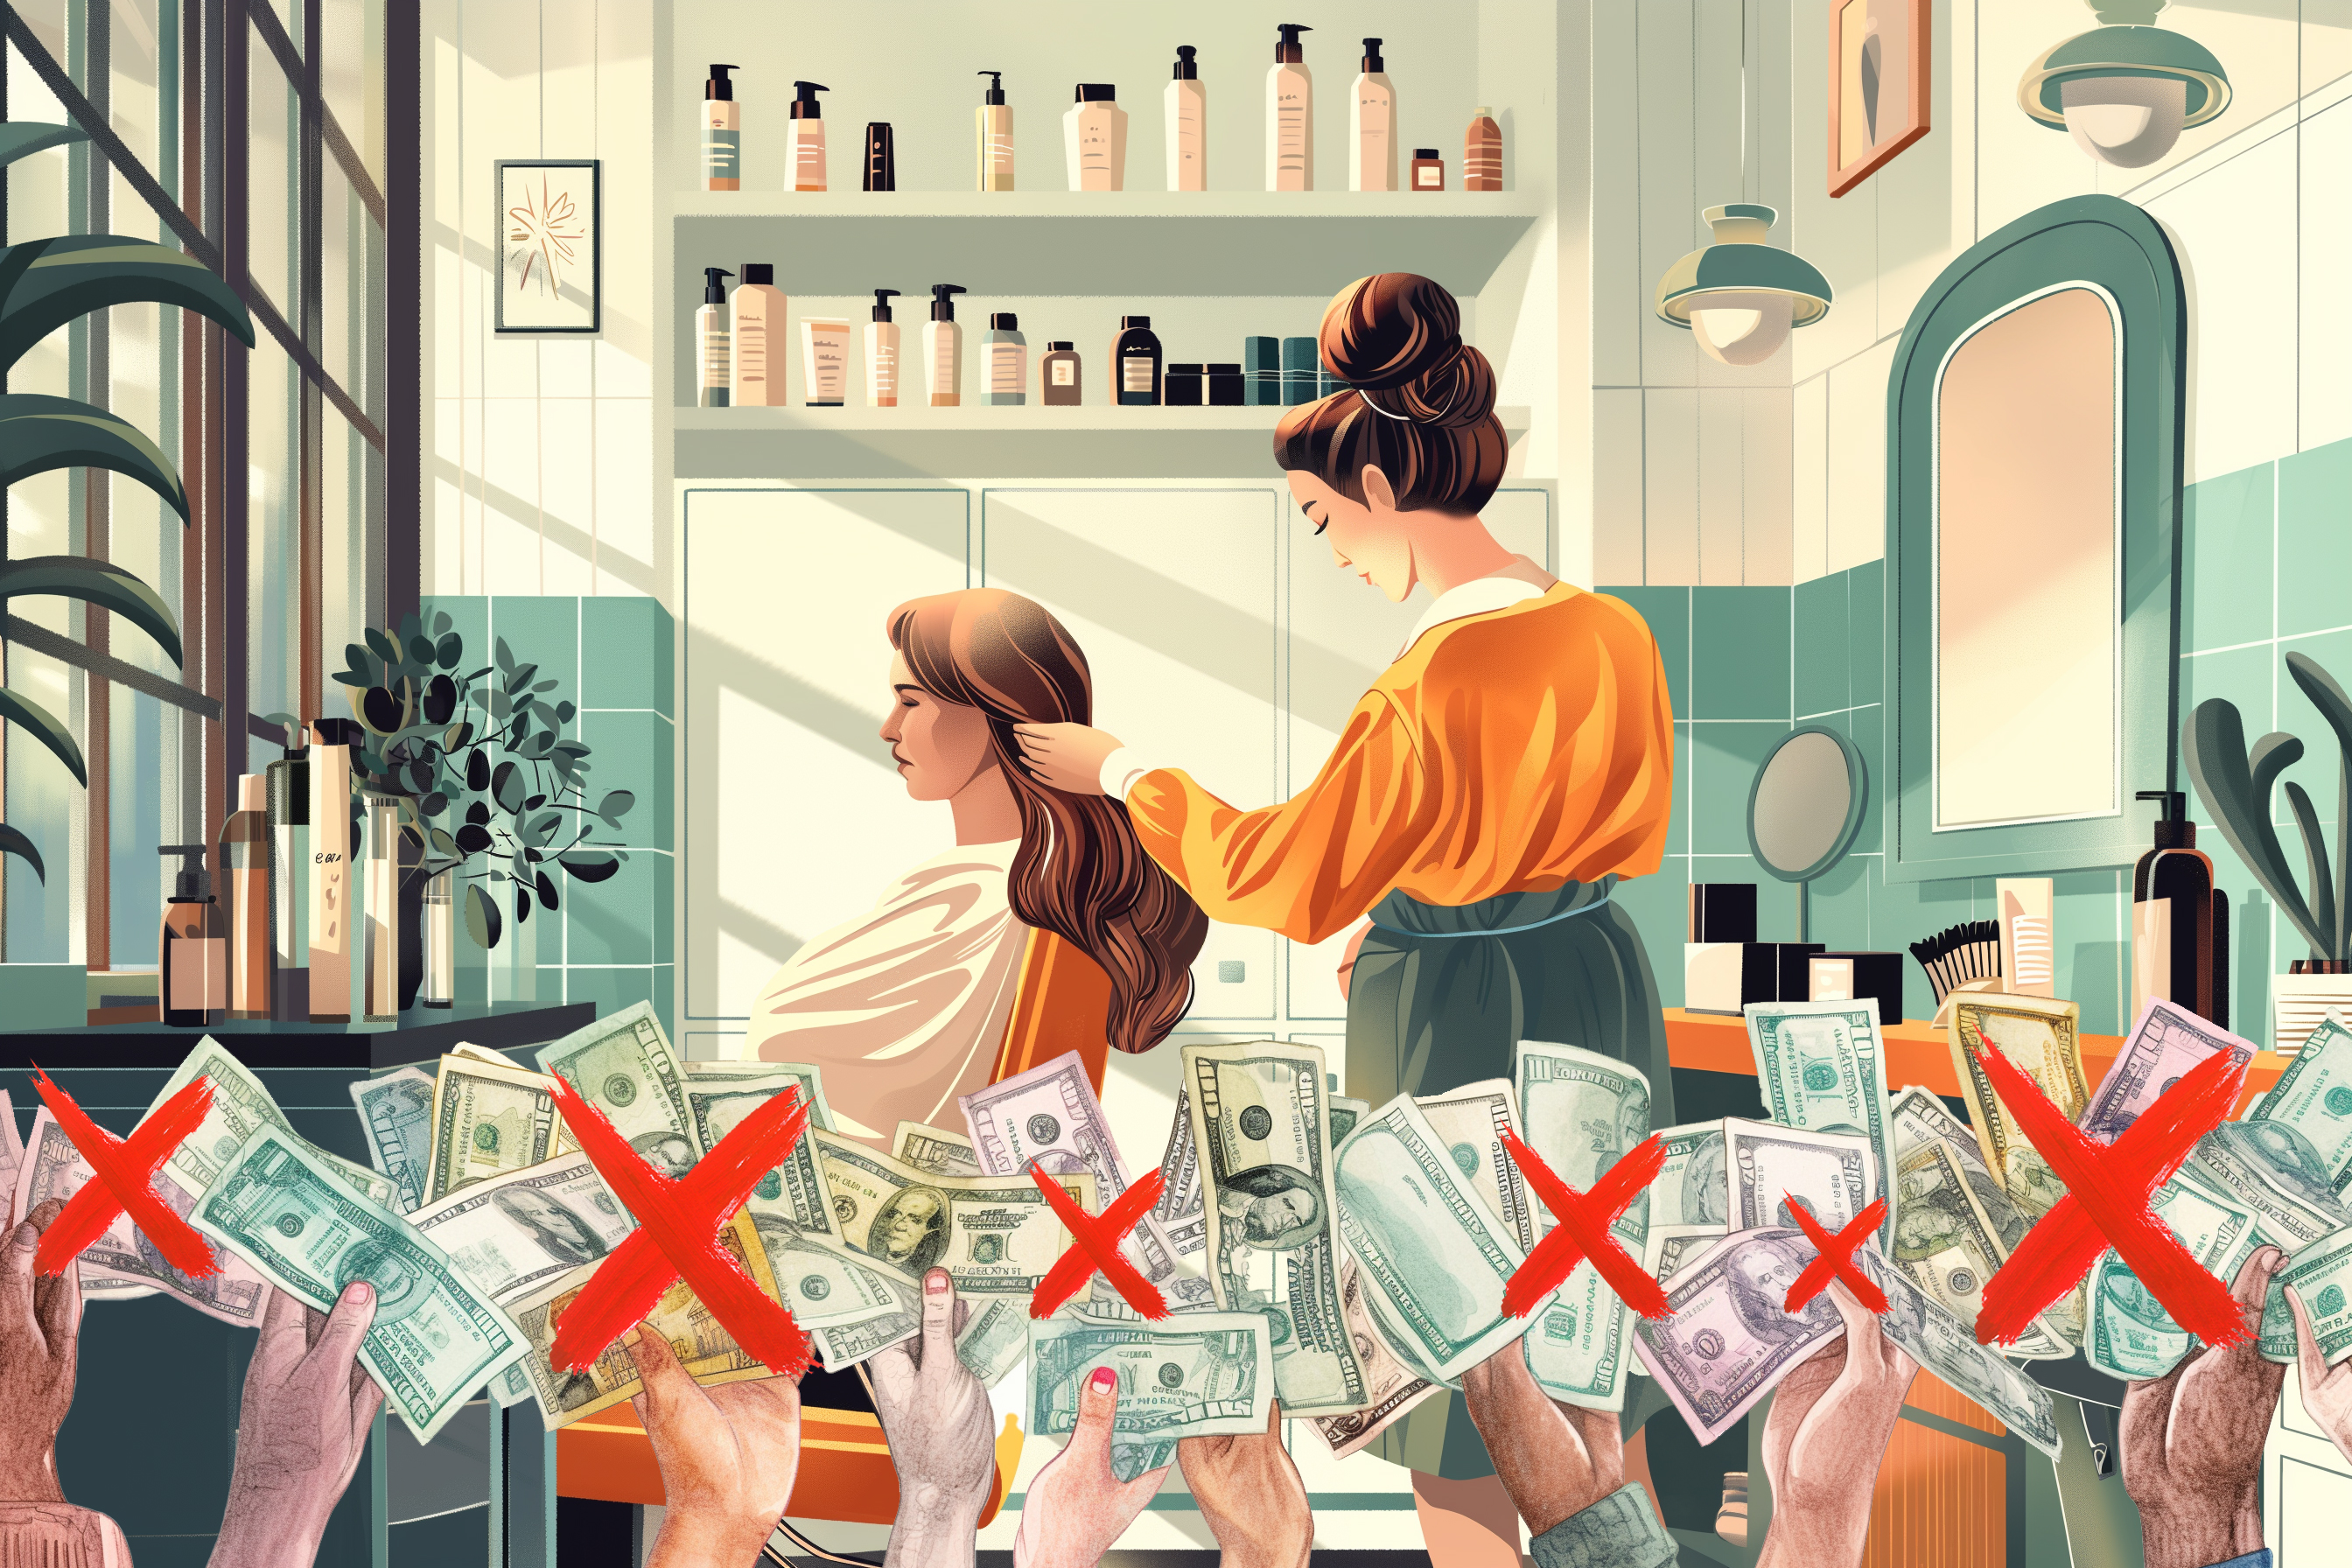 A stylist is cutting a woman's hair in a modern, well-lit salon. Hands holding various currencies are crossed out in the foreground, indicating a no-cash policy.